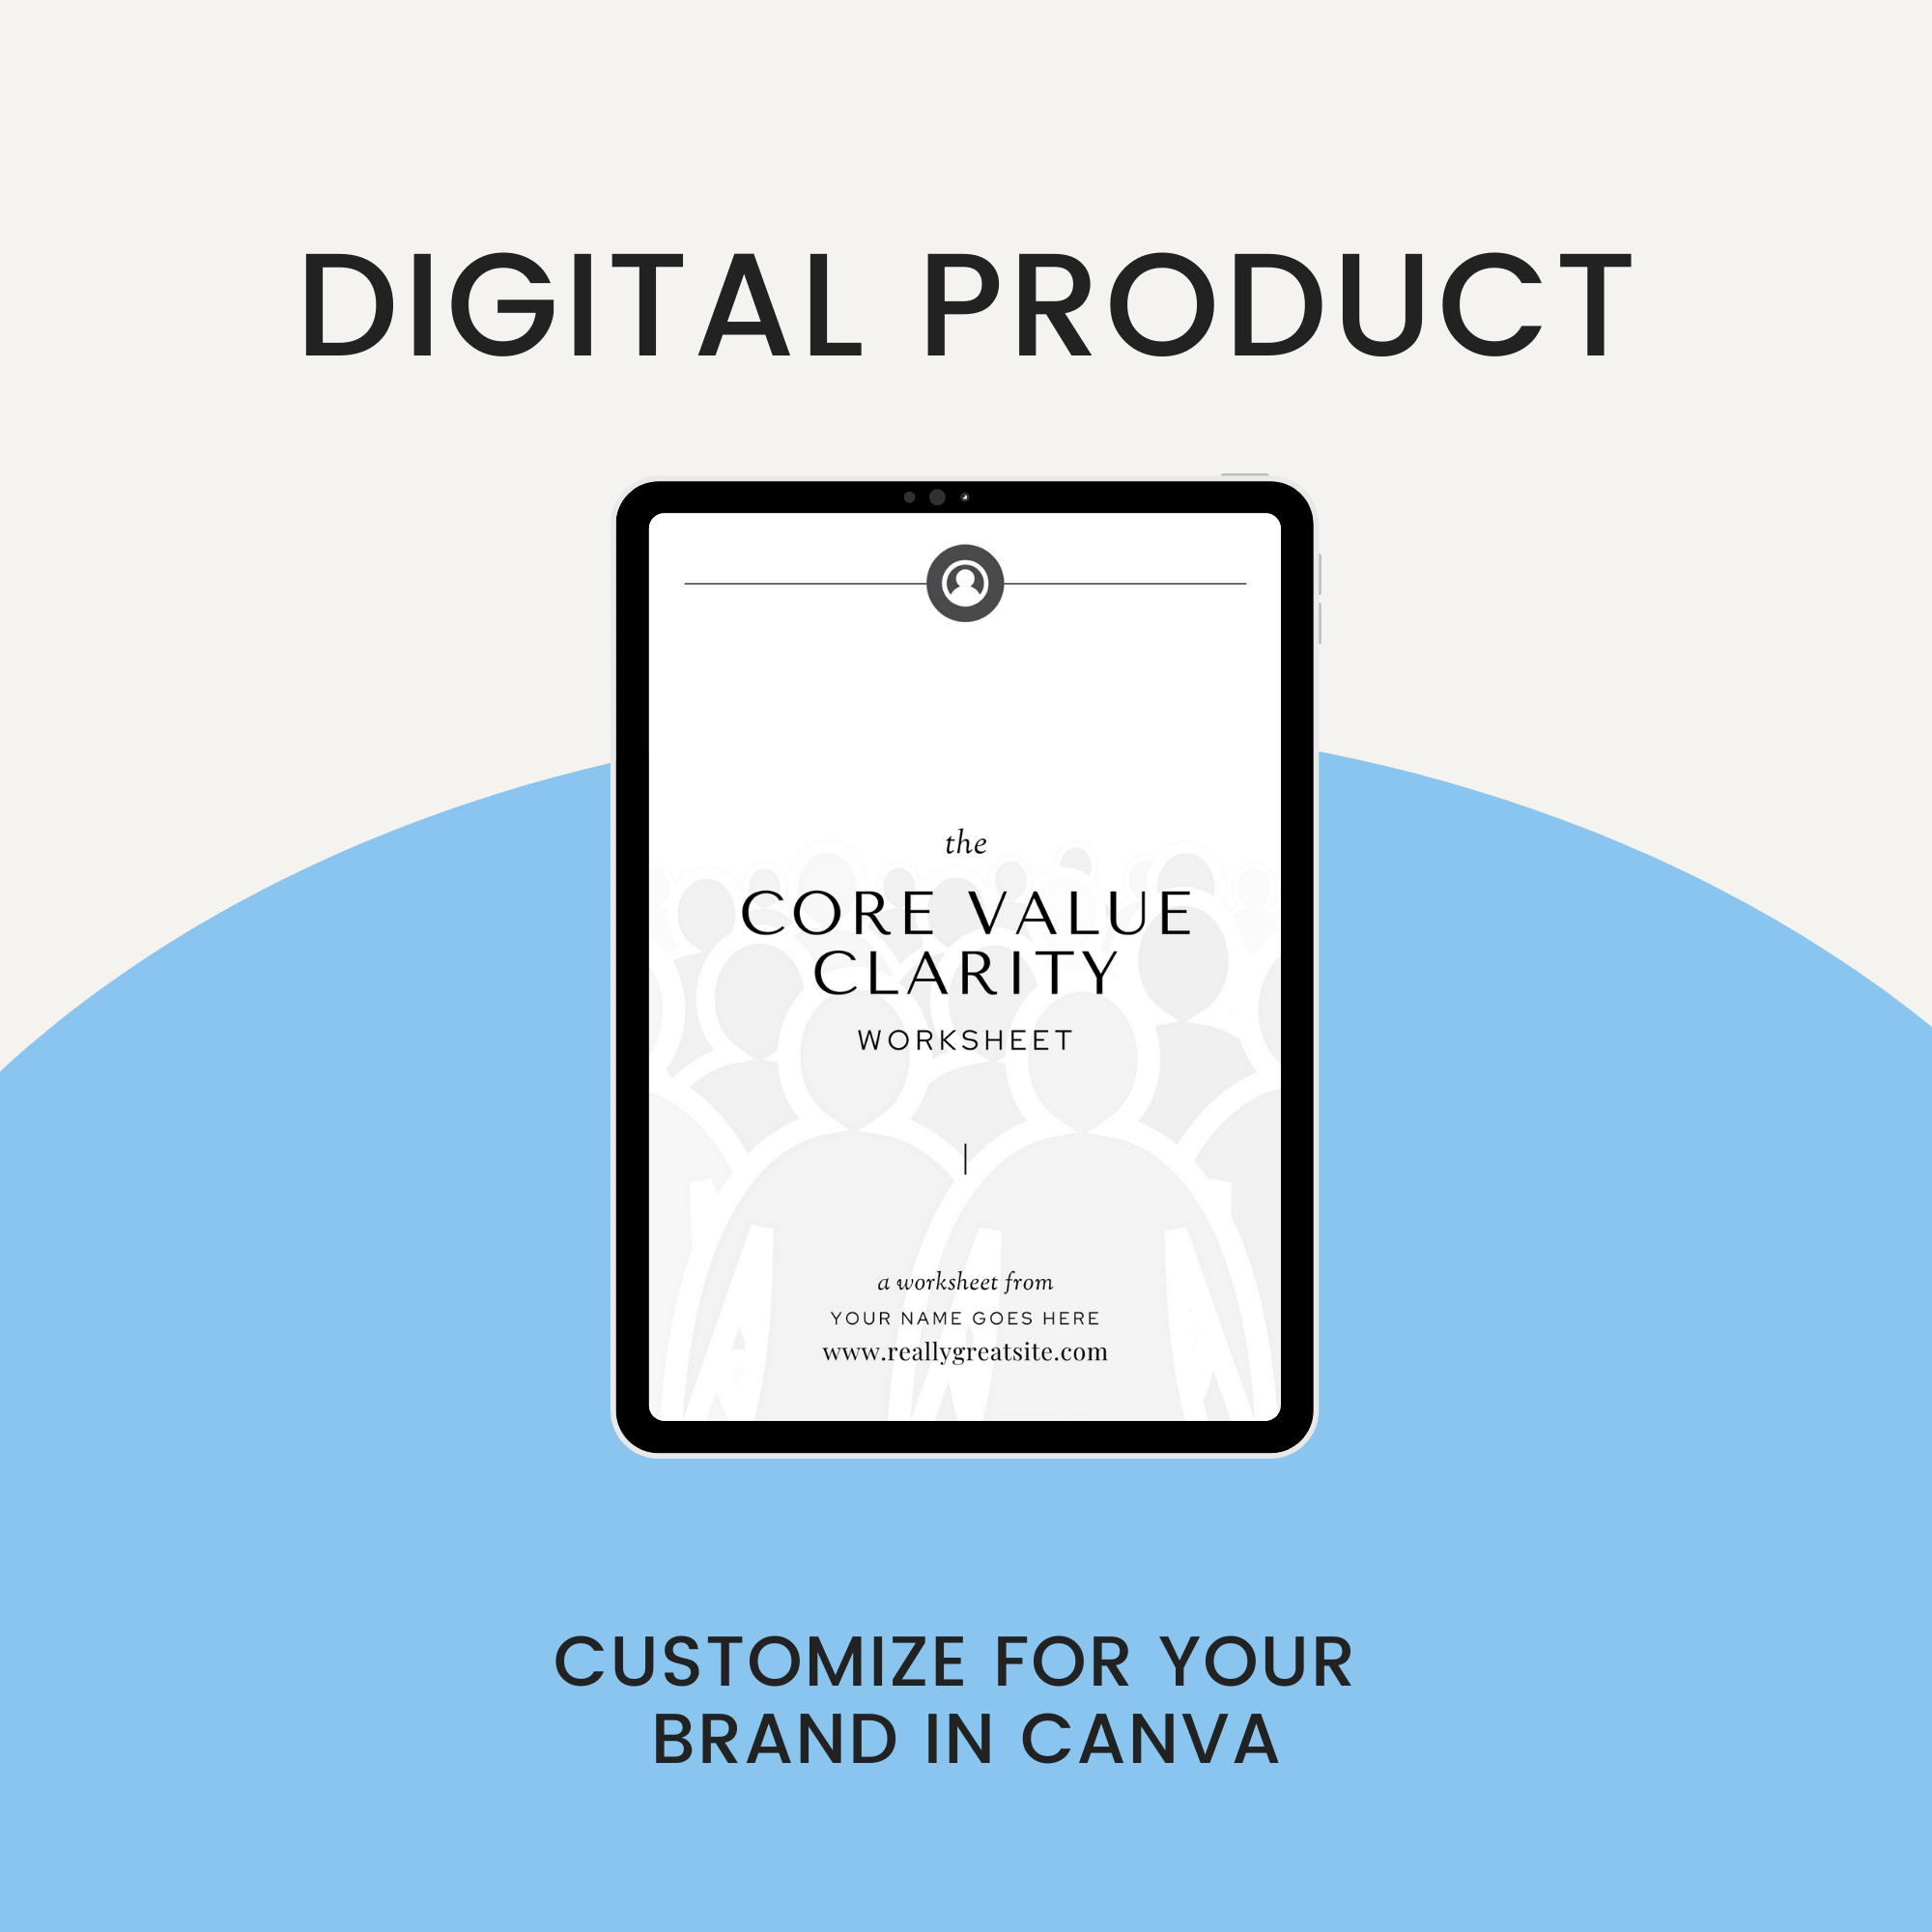 Core_Value_Clarity_Worksheet_Digital_Product_Customize_In_Canva